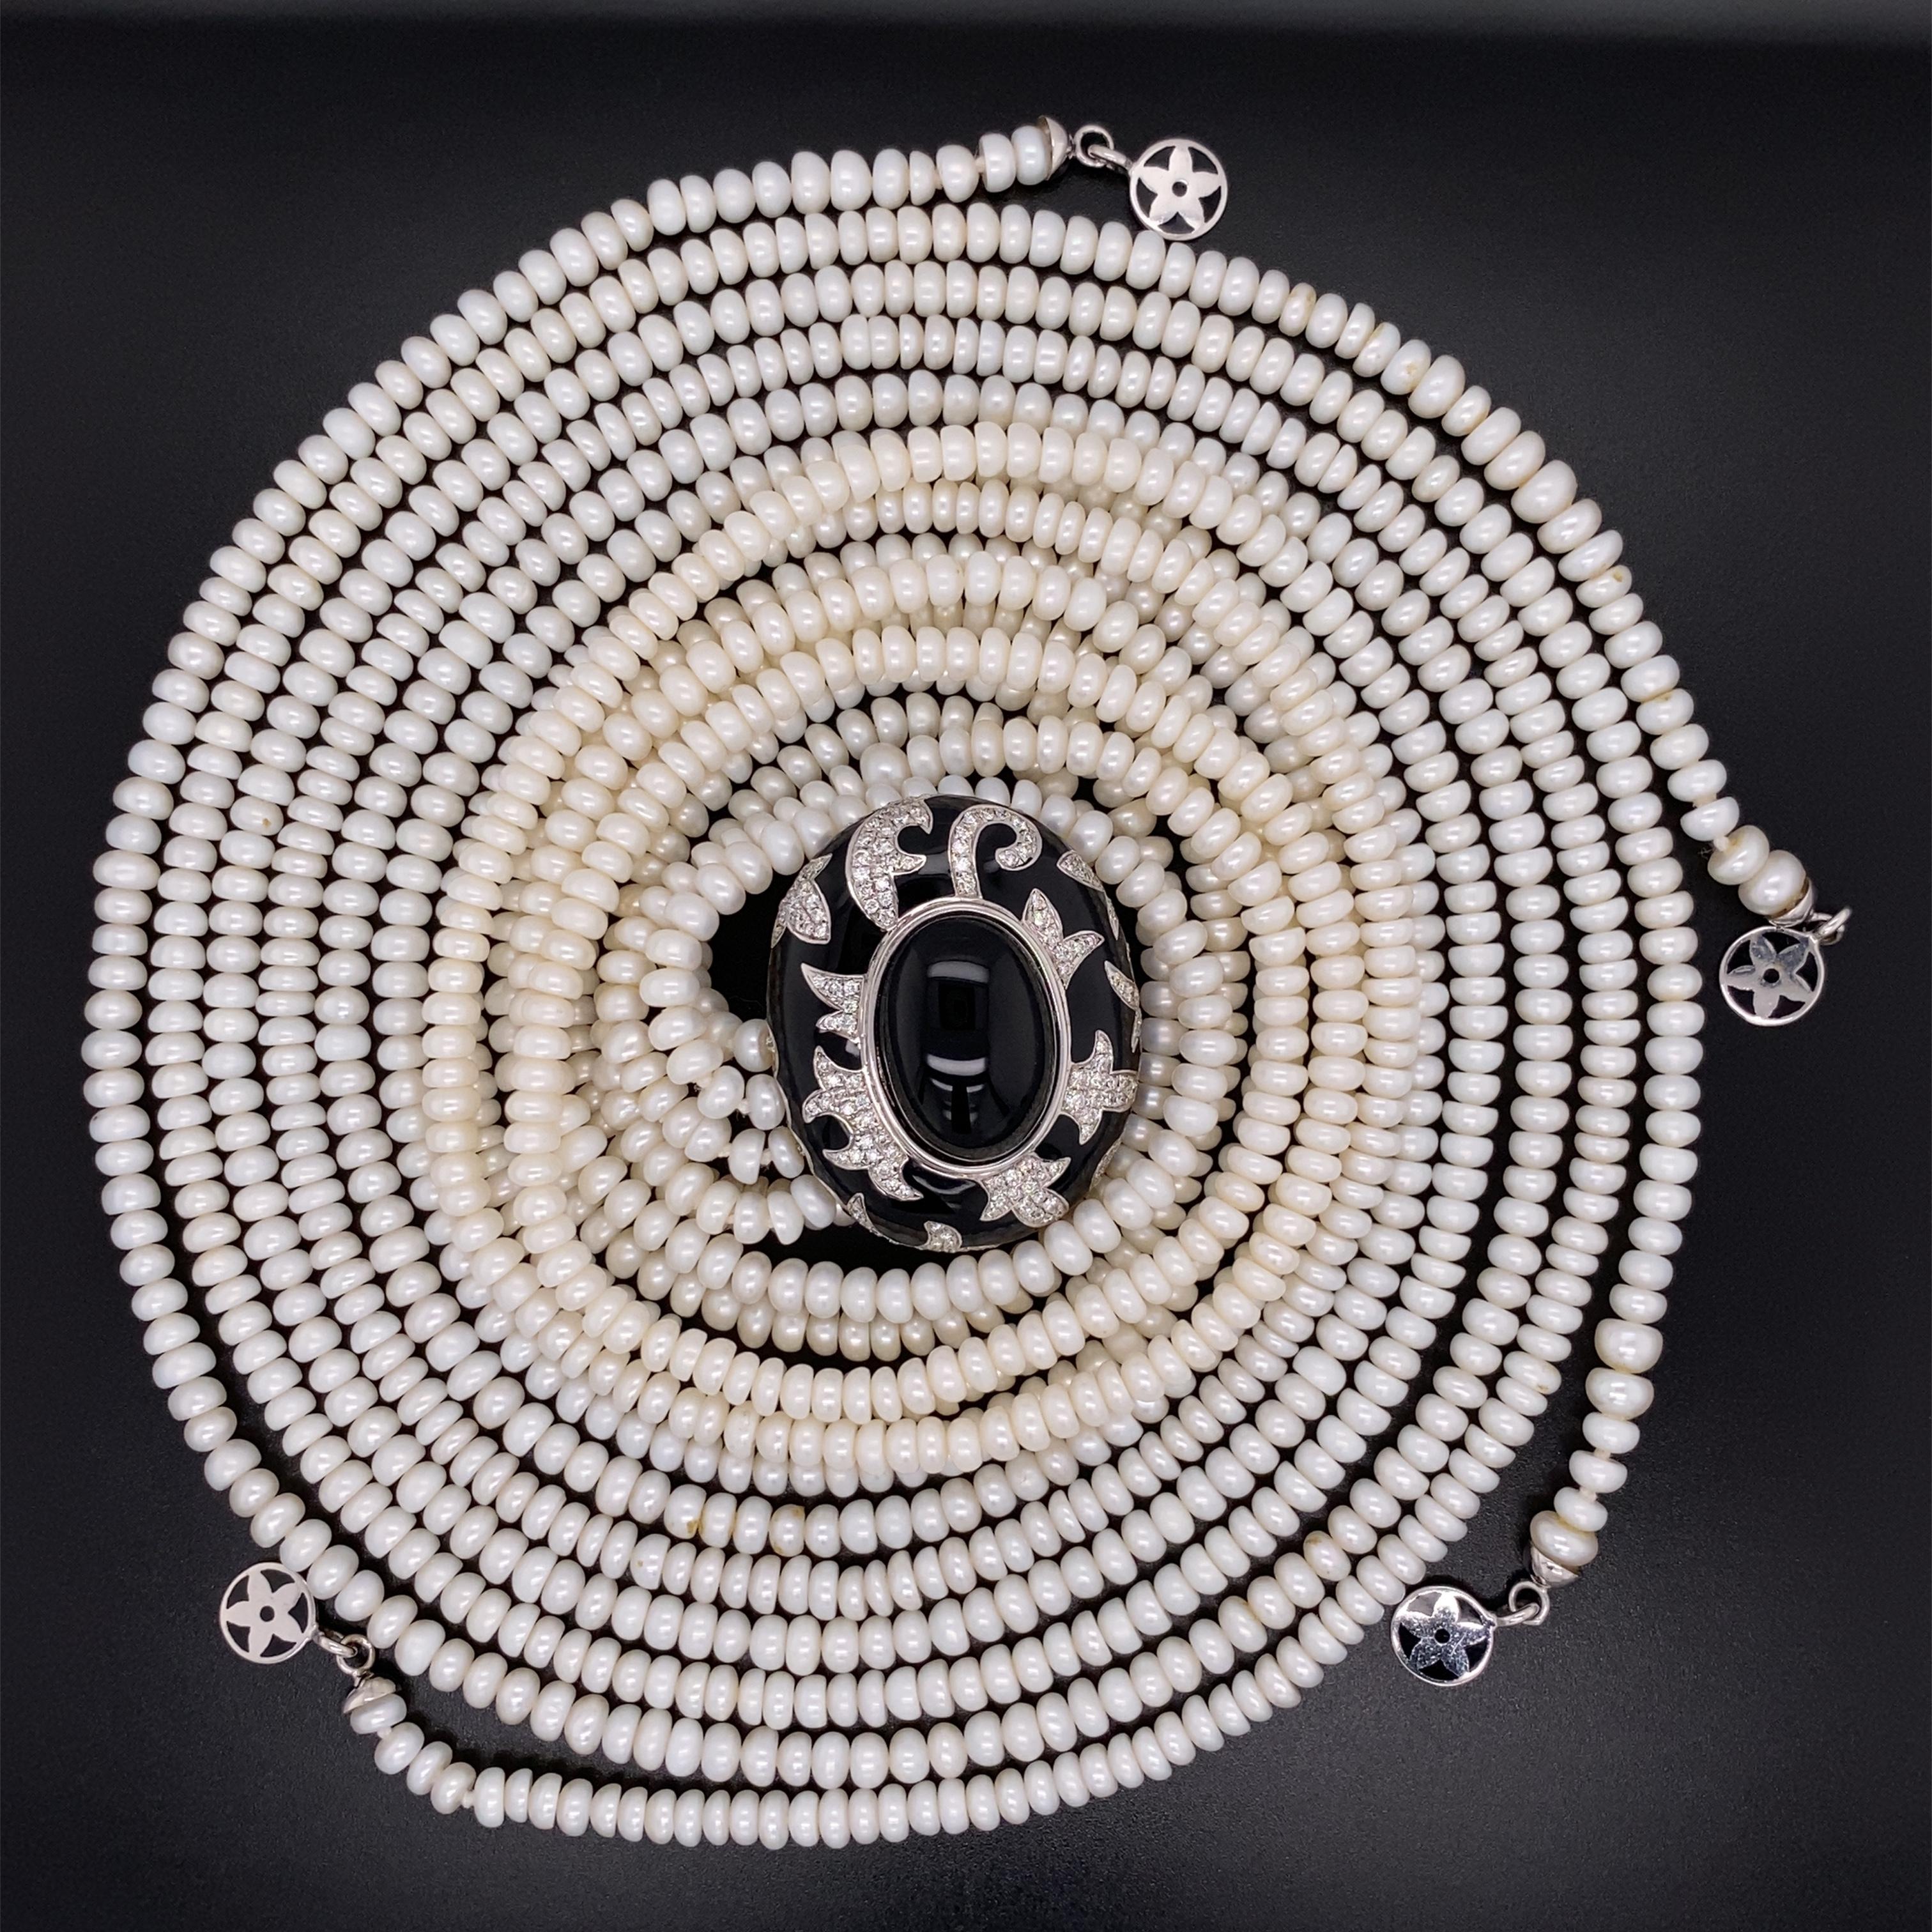 Simply Beautiful! Designer Nouvelle Bague Foglie di Acanto Onyx, Diamond and Black Enamel 18K white Gold Slide on 4 strand Pearl Necklace. 10.09 Carat Onyx and Diamonds 1.85tcw. Original Retail price: $19,000. More Beautiful in real